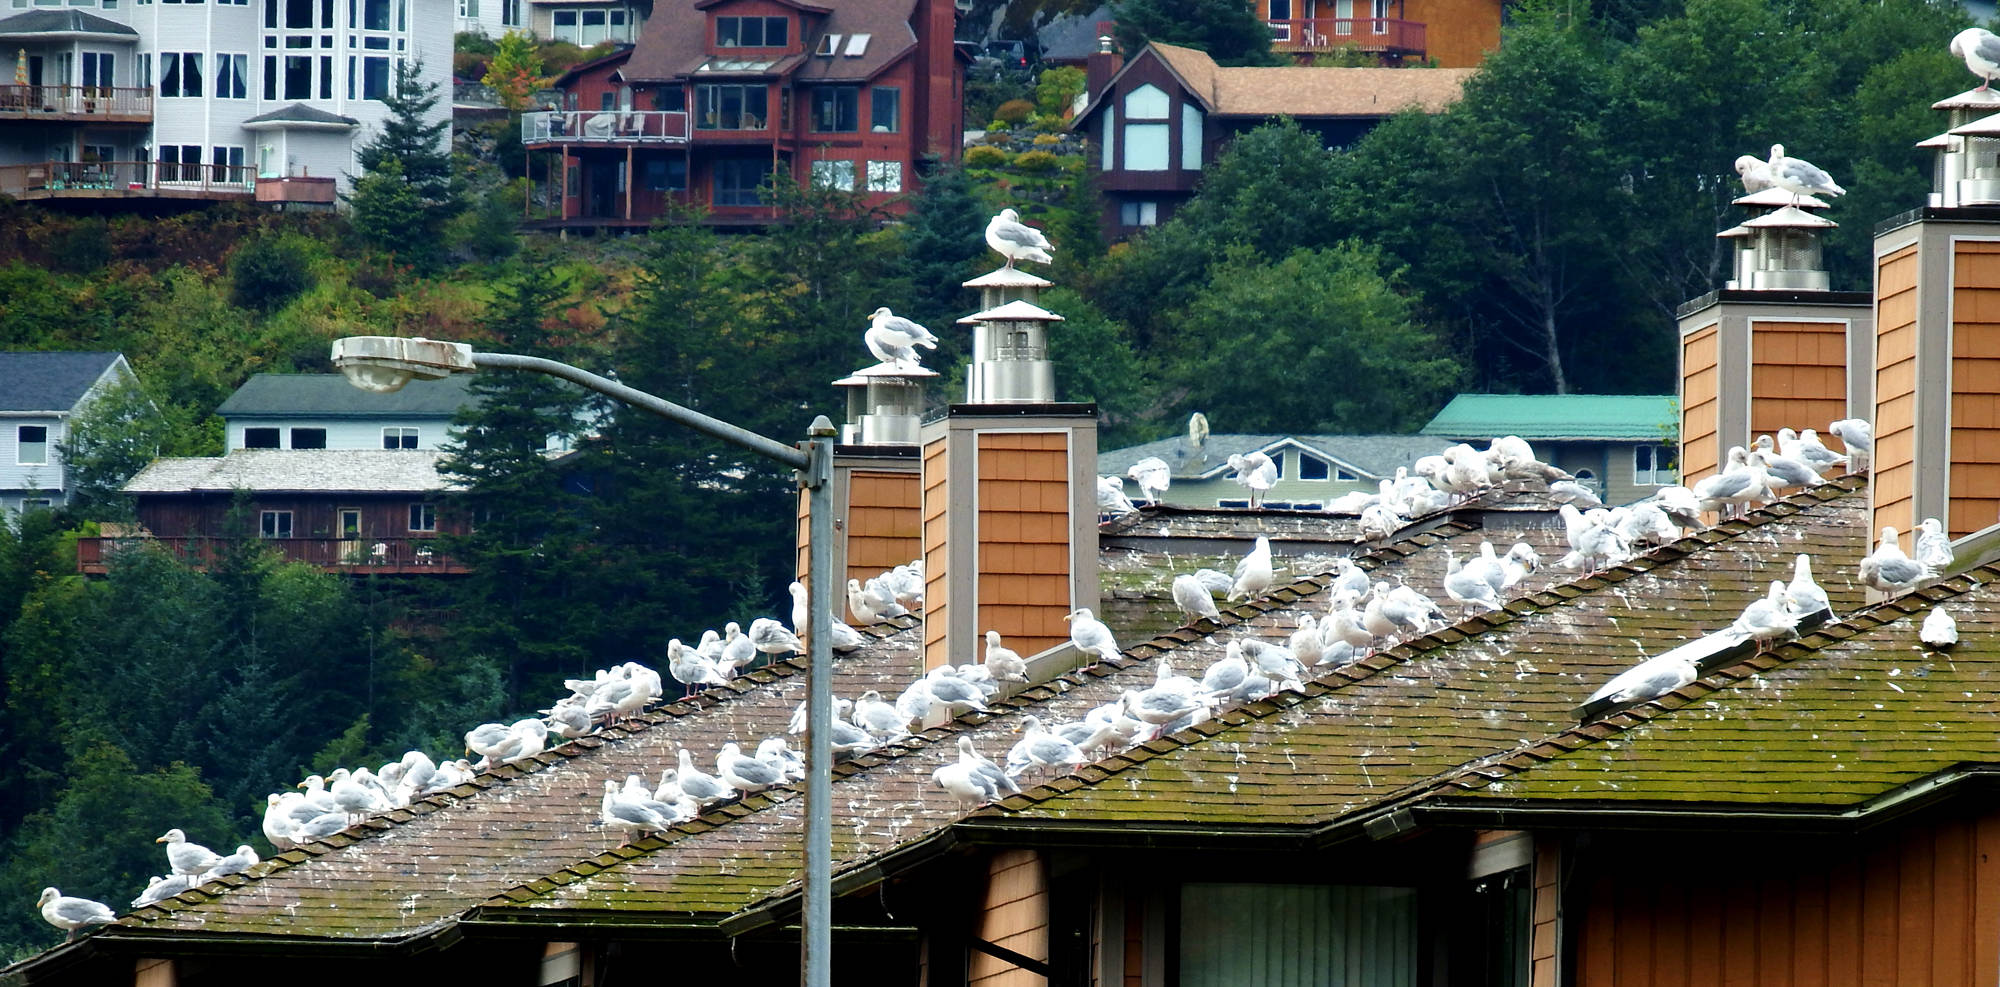 Gulls congregate on downtown condos. (Photo by Linda Shaw)